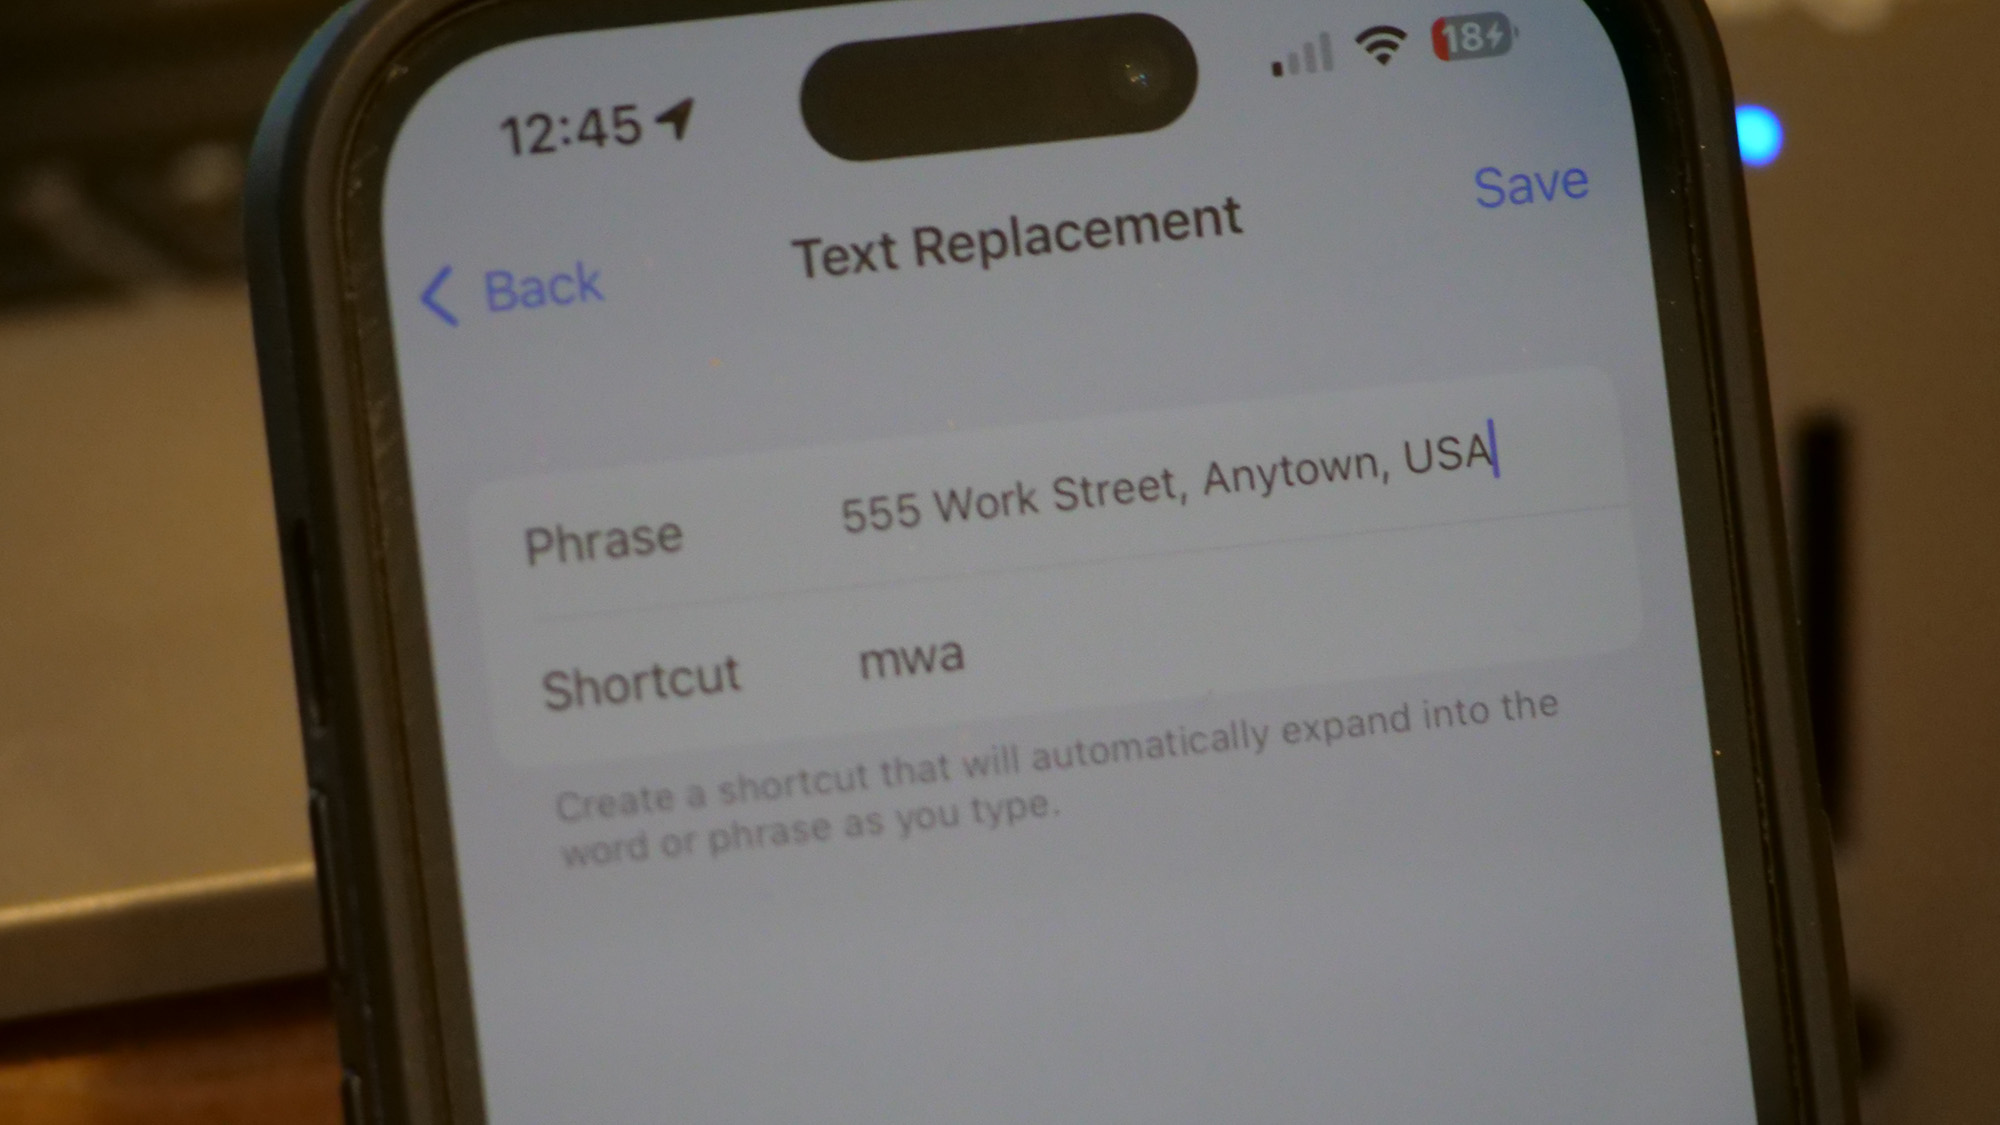 iPhone 14 Pro displays the Text Replacement in iOS to replace 